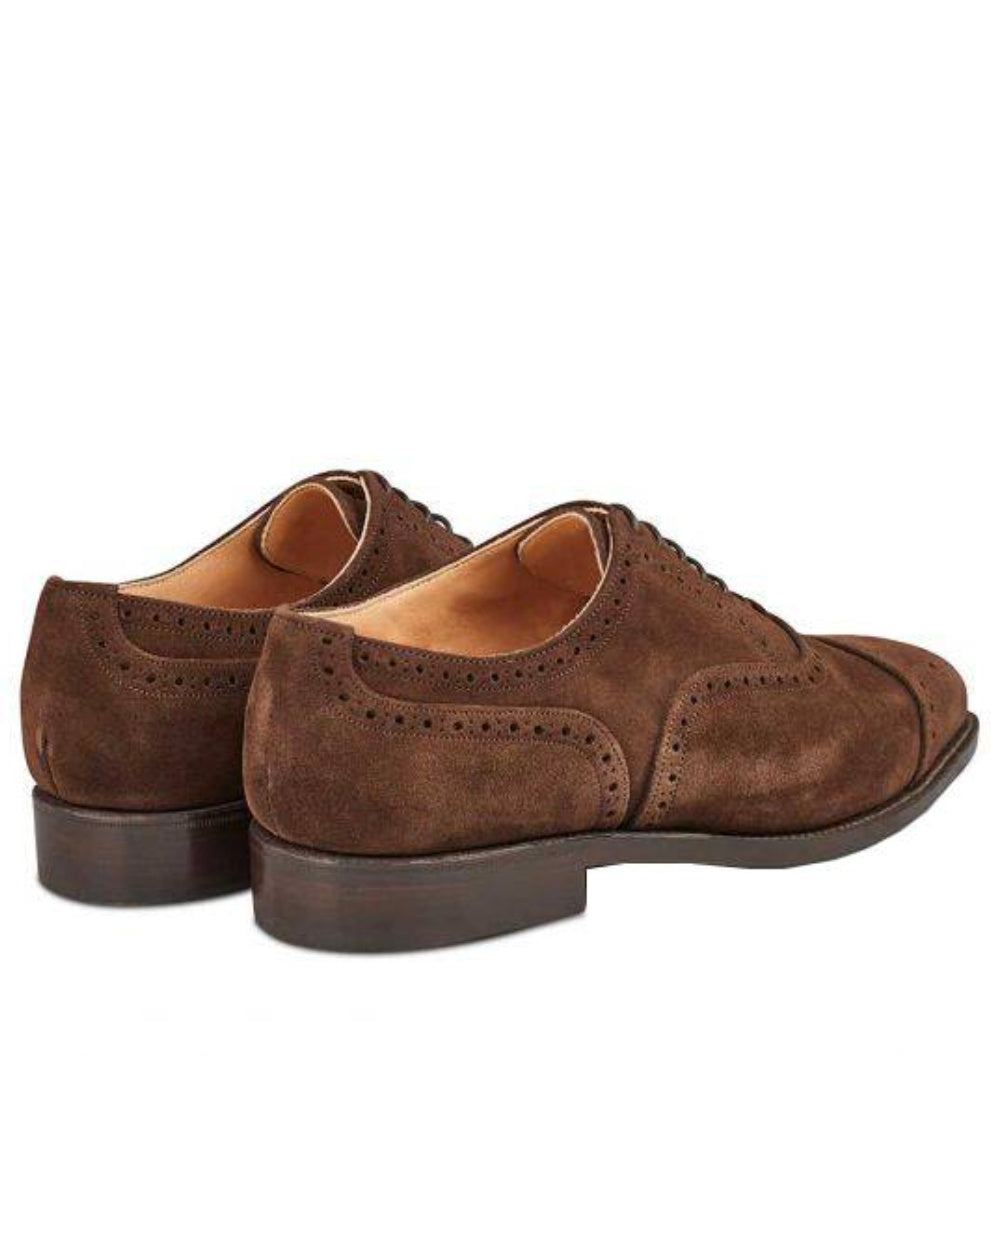 Chocolate Suede Coloured Trickers Kensington Leather Sole Toecap Oxford City Shoe On A White Background 